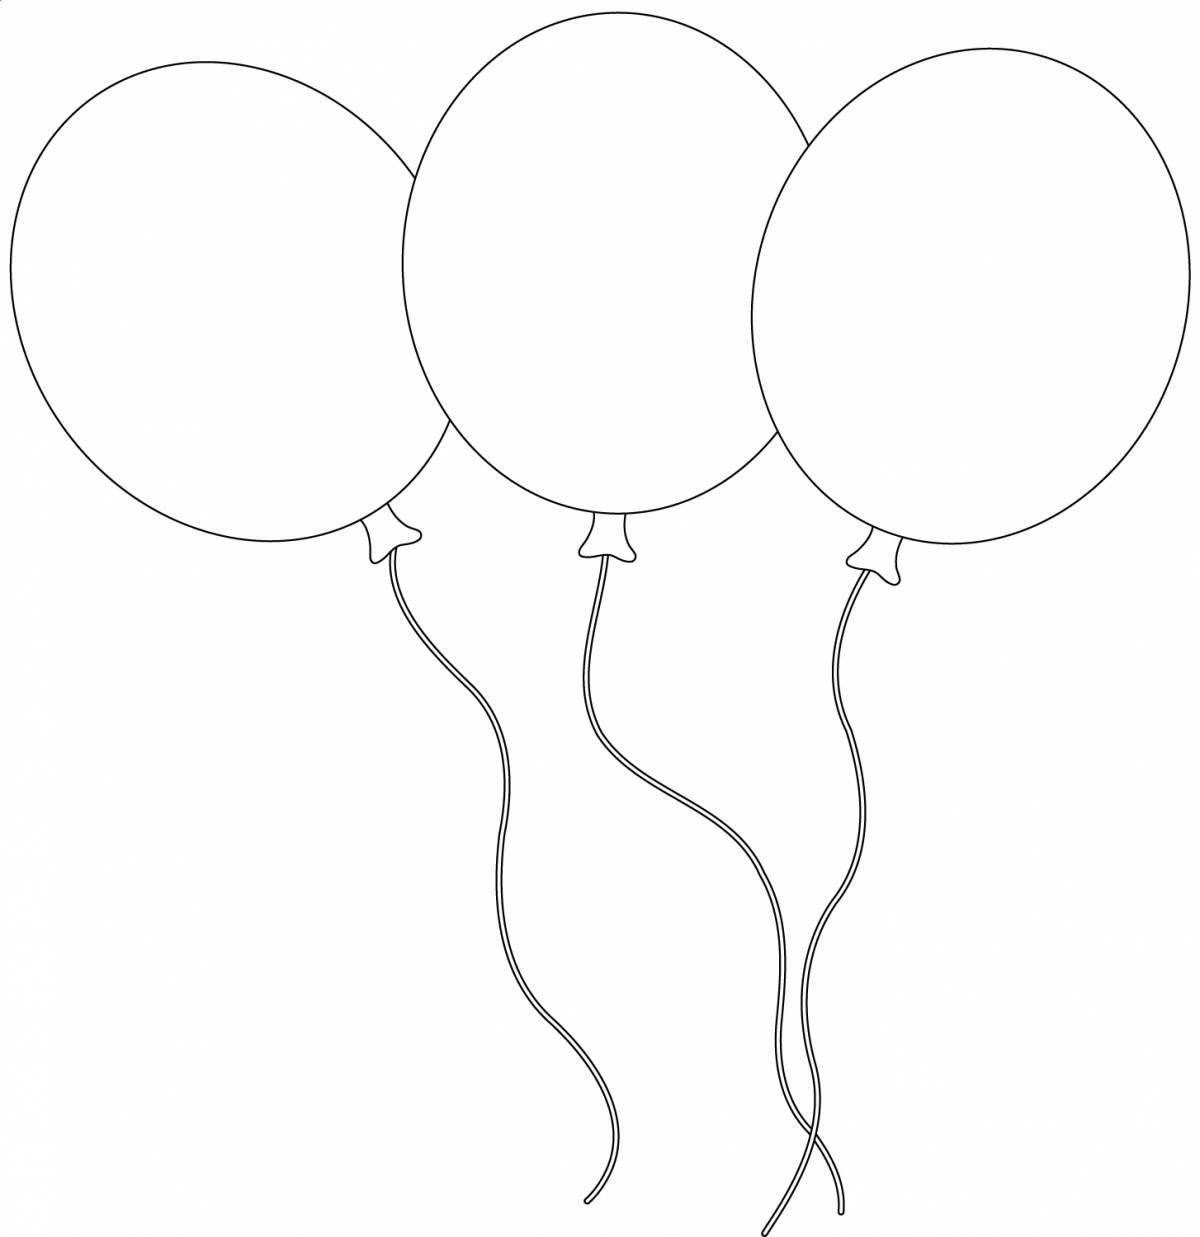 Joyful coloring book with balloons for kids